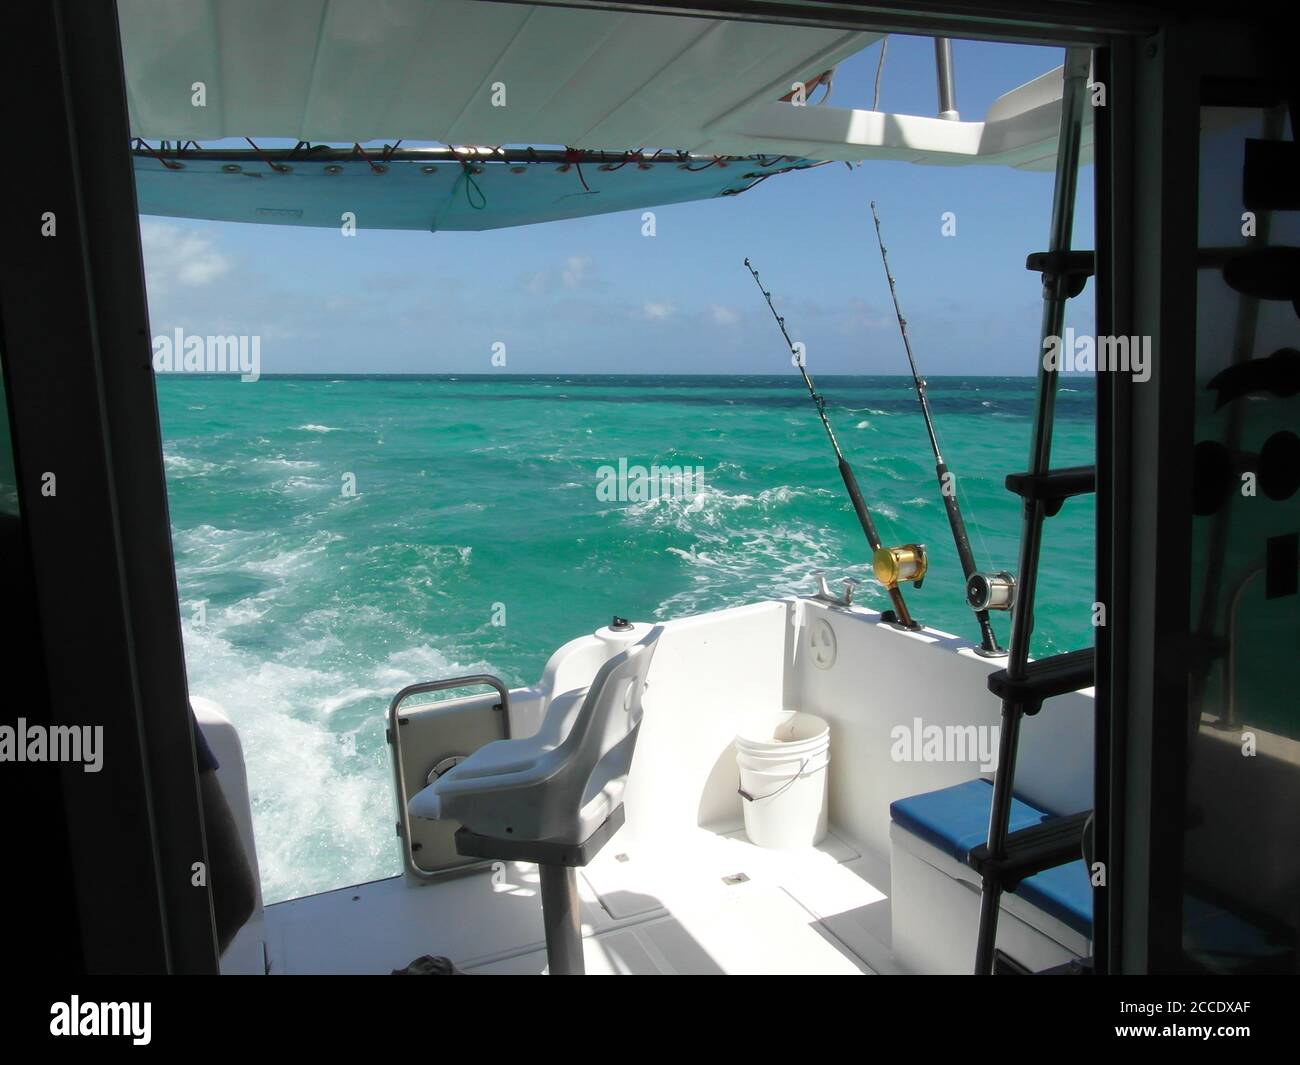 Sea fishing from a boat along the coast of Cuba with bright blue sea and sky Stock Photo